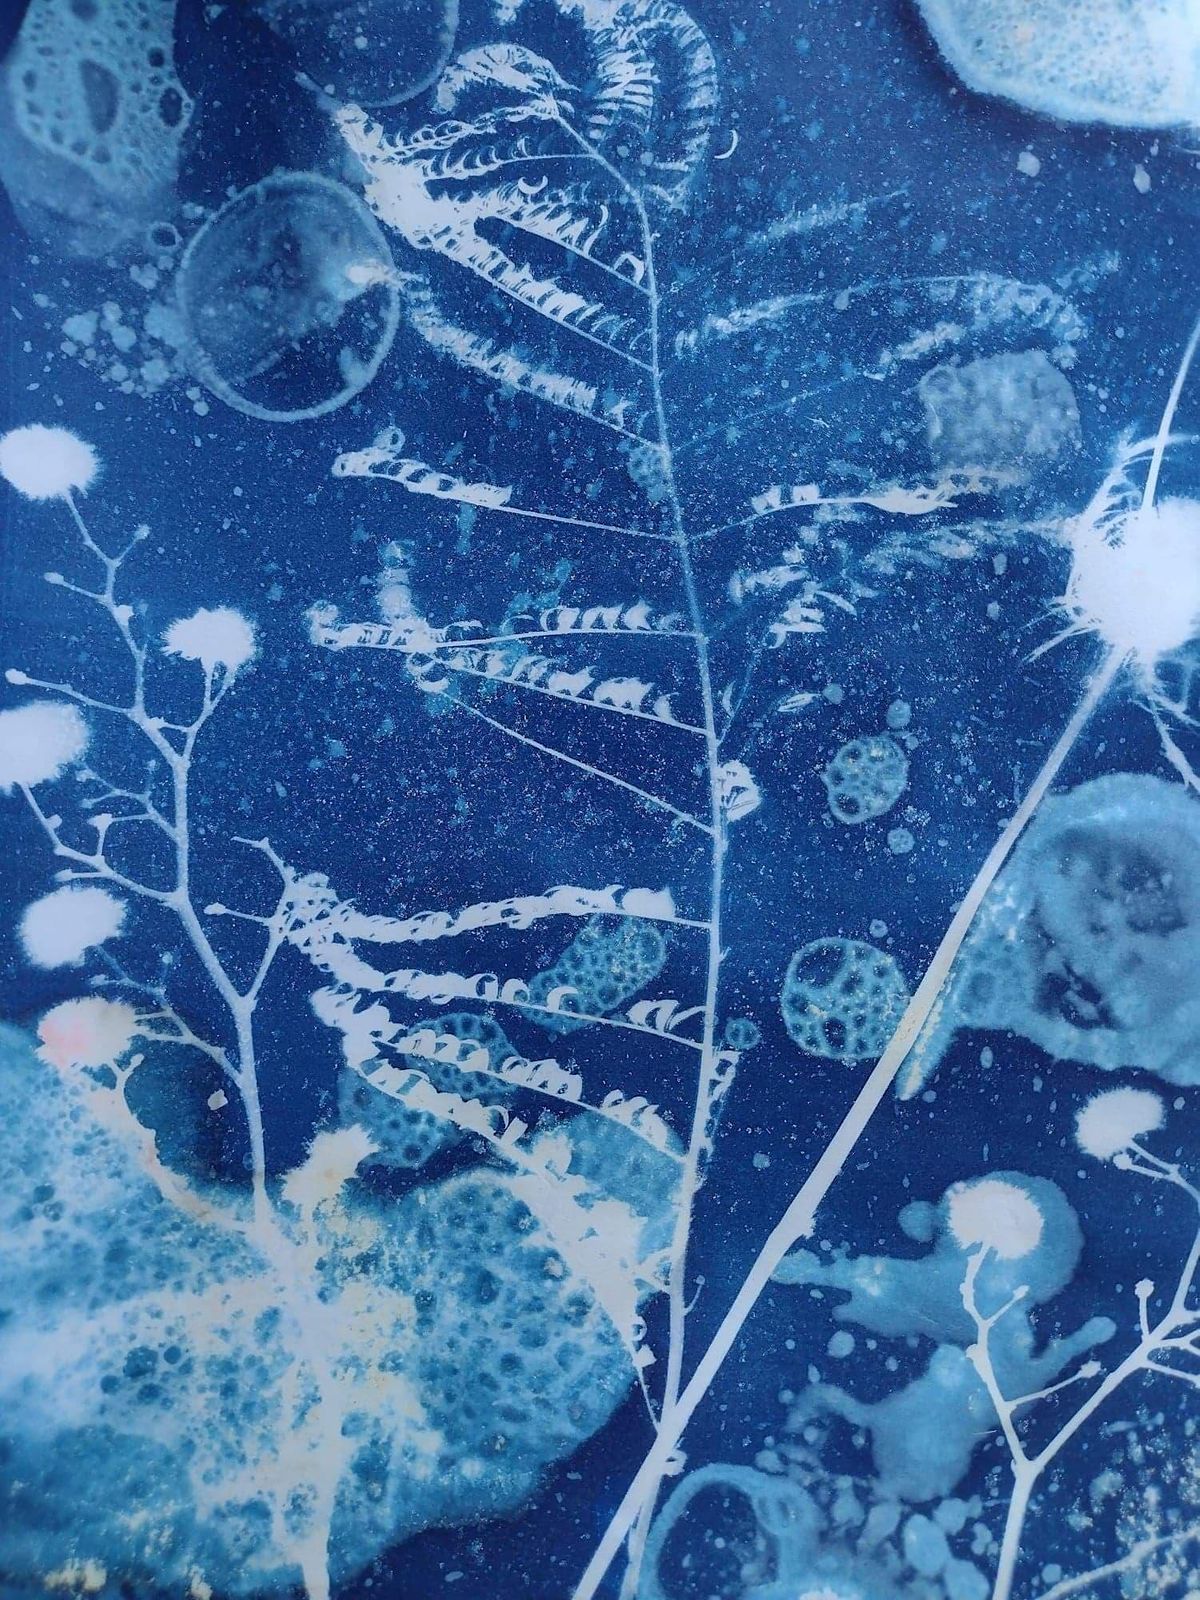 Cyanotype printing with fabric and paper SLR